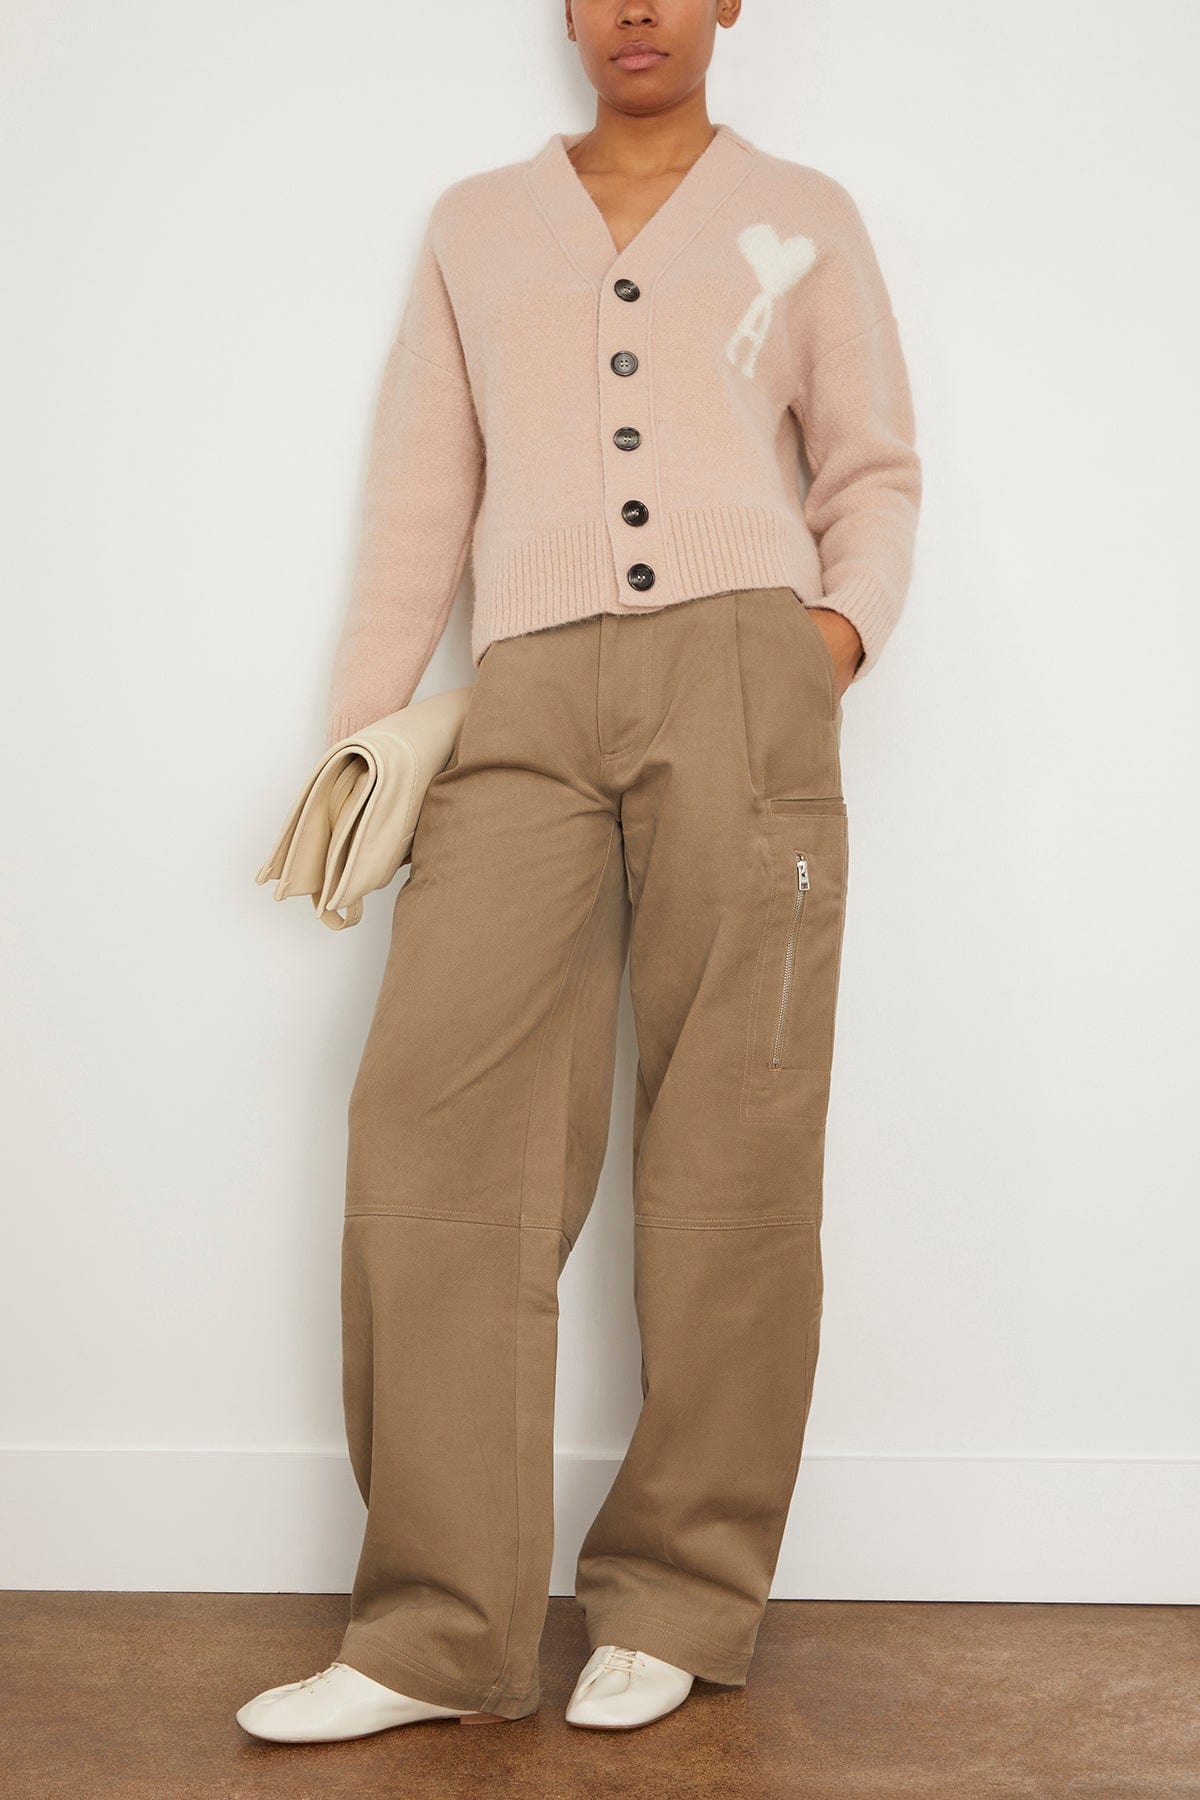 Ami Paris Sweaters Off White ADC Cardigan in Powder Pink/Ivory